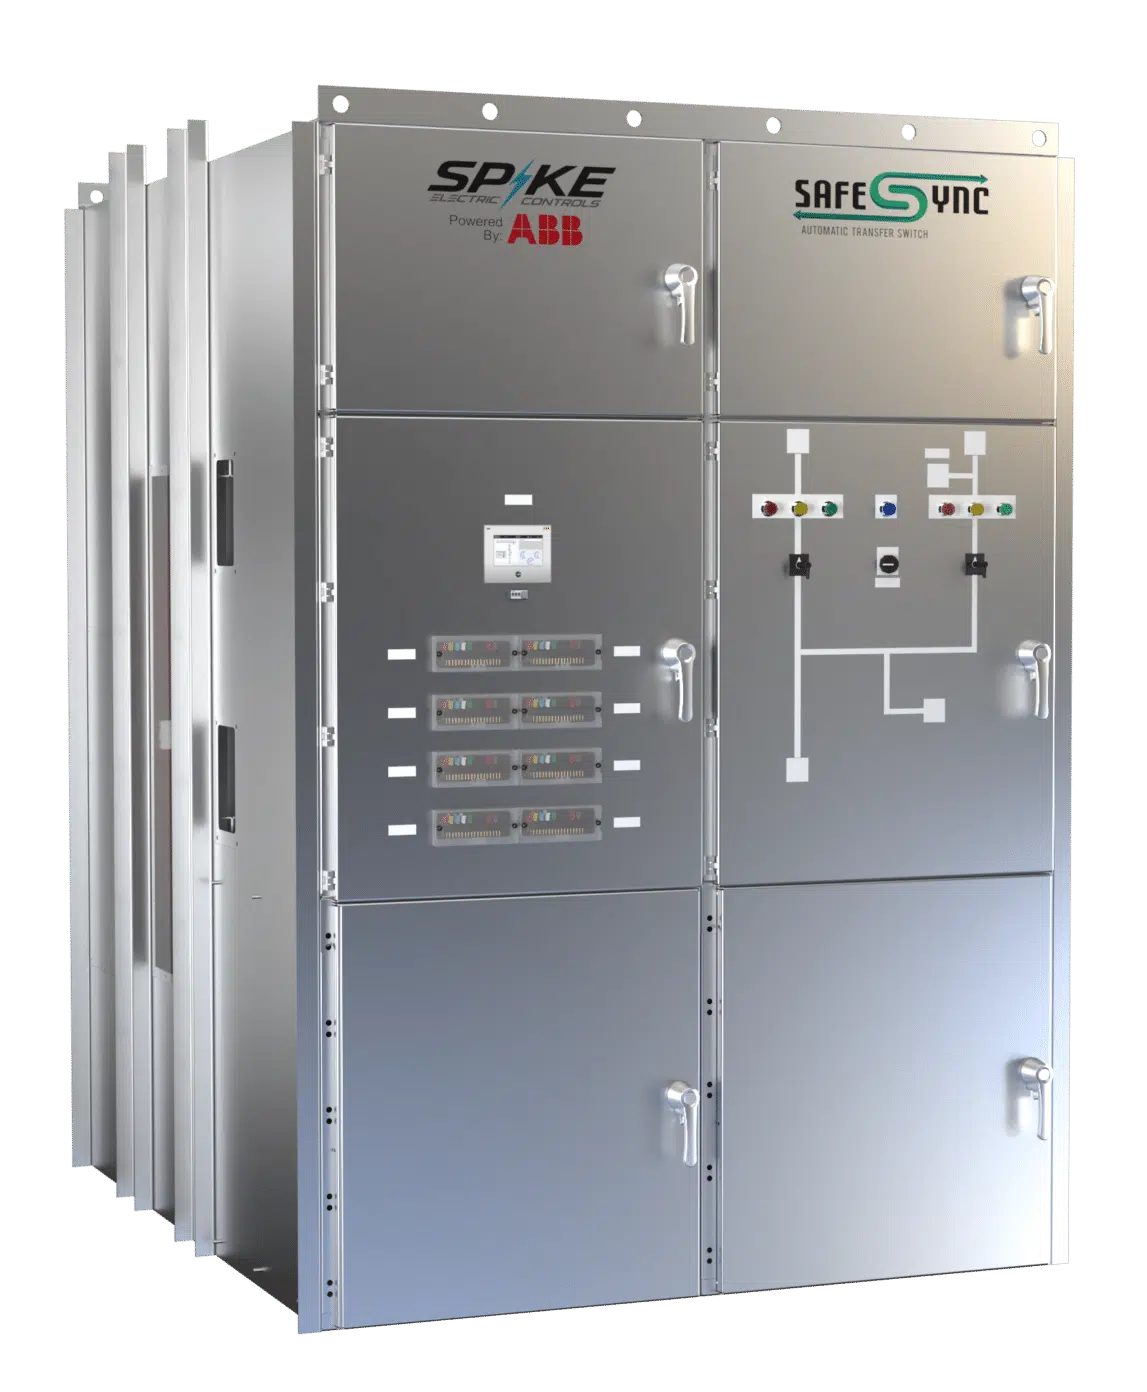 Safe Sync Medium Voltage Automatic Transfer Switch by Spike Electric